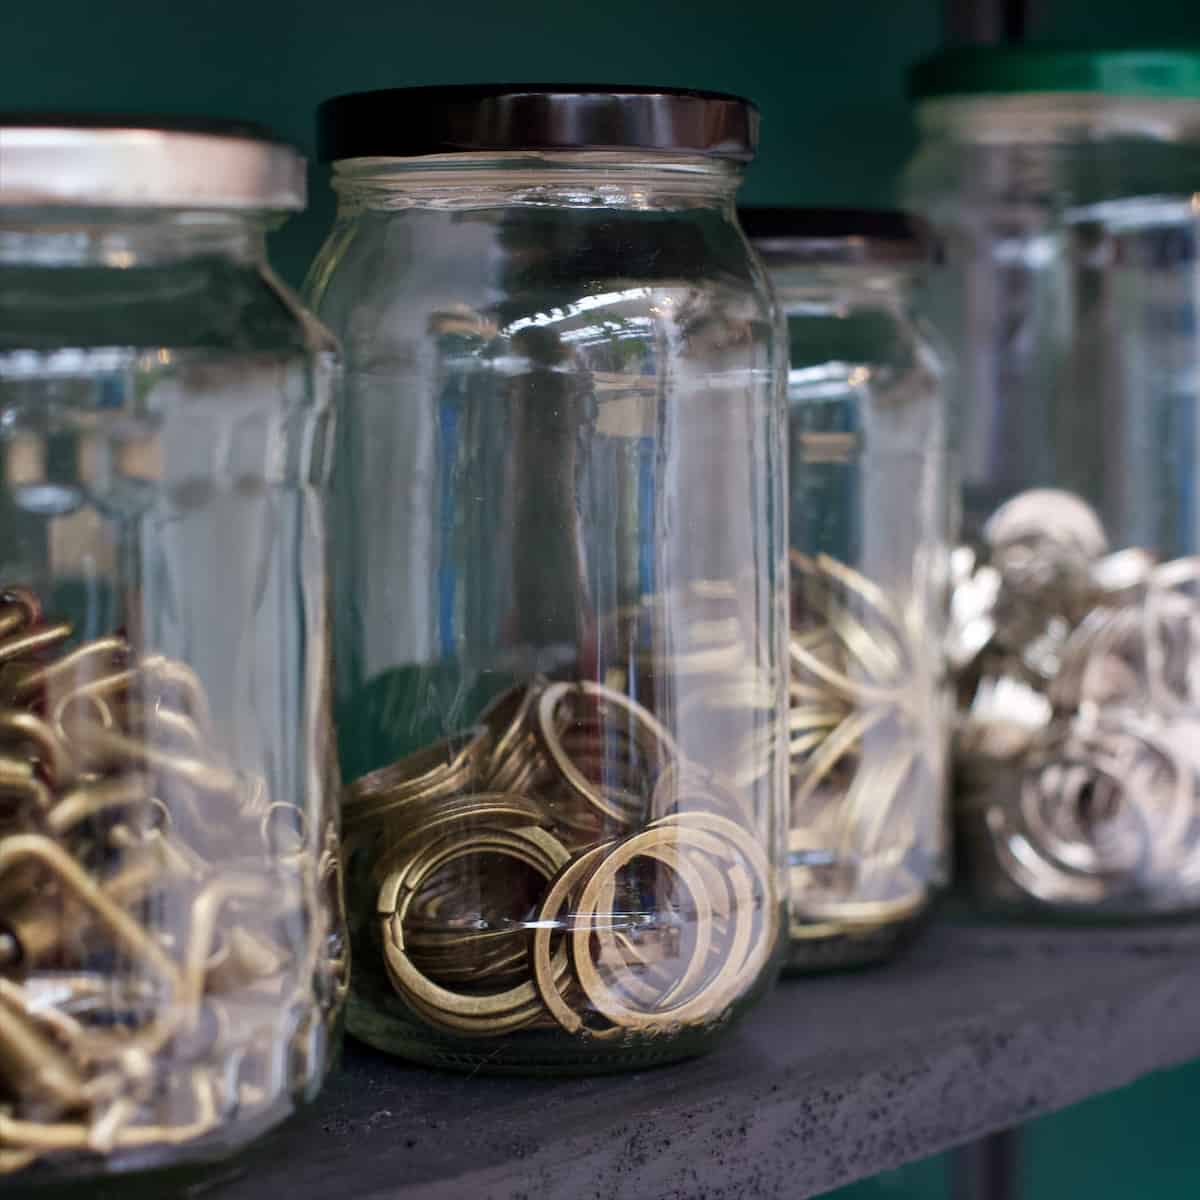 Mismatched glass jars containing keyrings and buckles for leather making